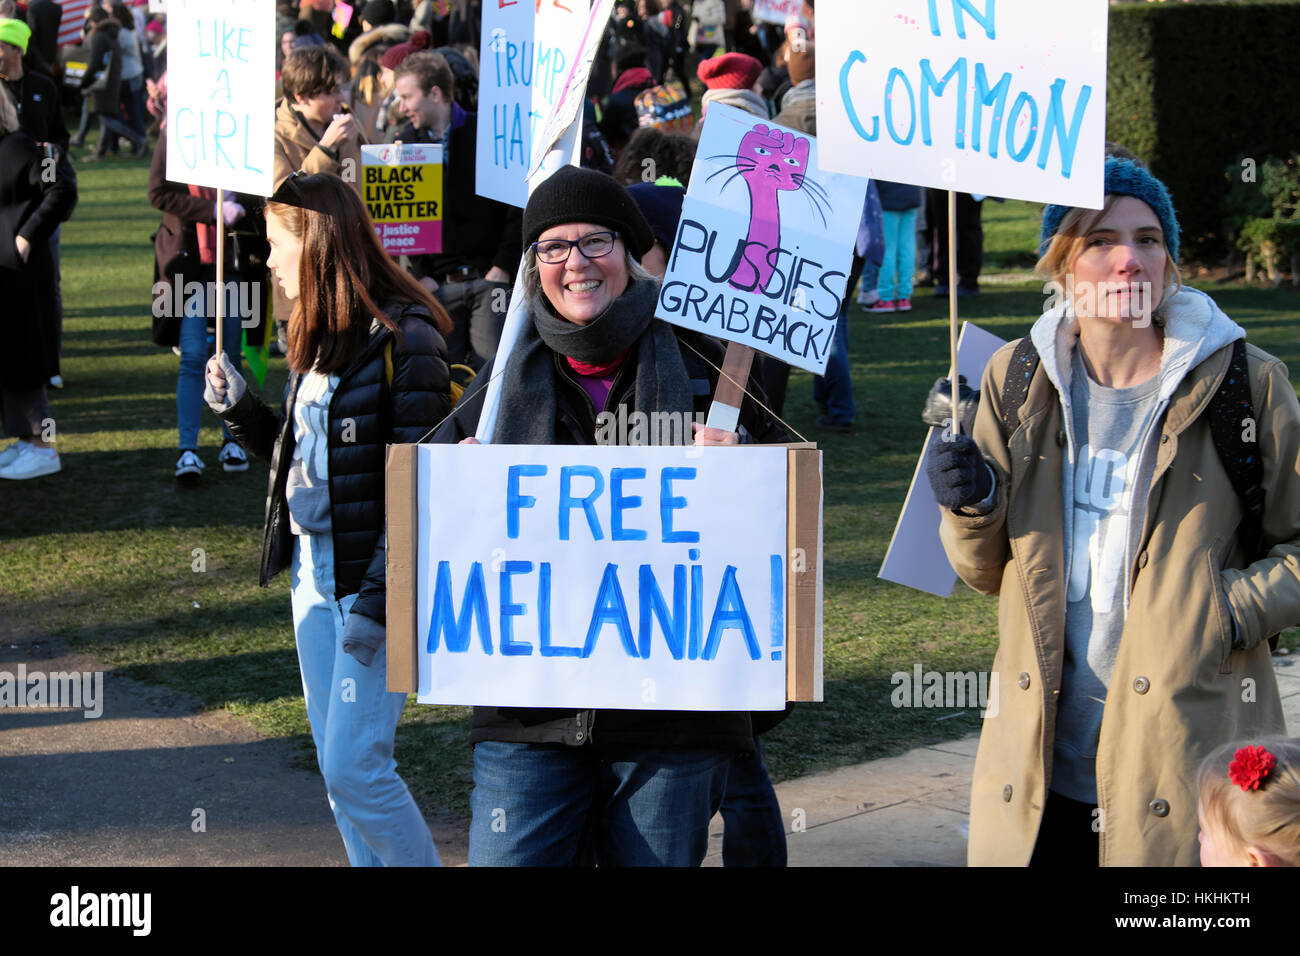 protesters-with-free-melania-poster-at-womens-march-on-london-outside-HKHKTH.jpg